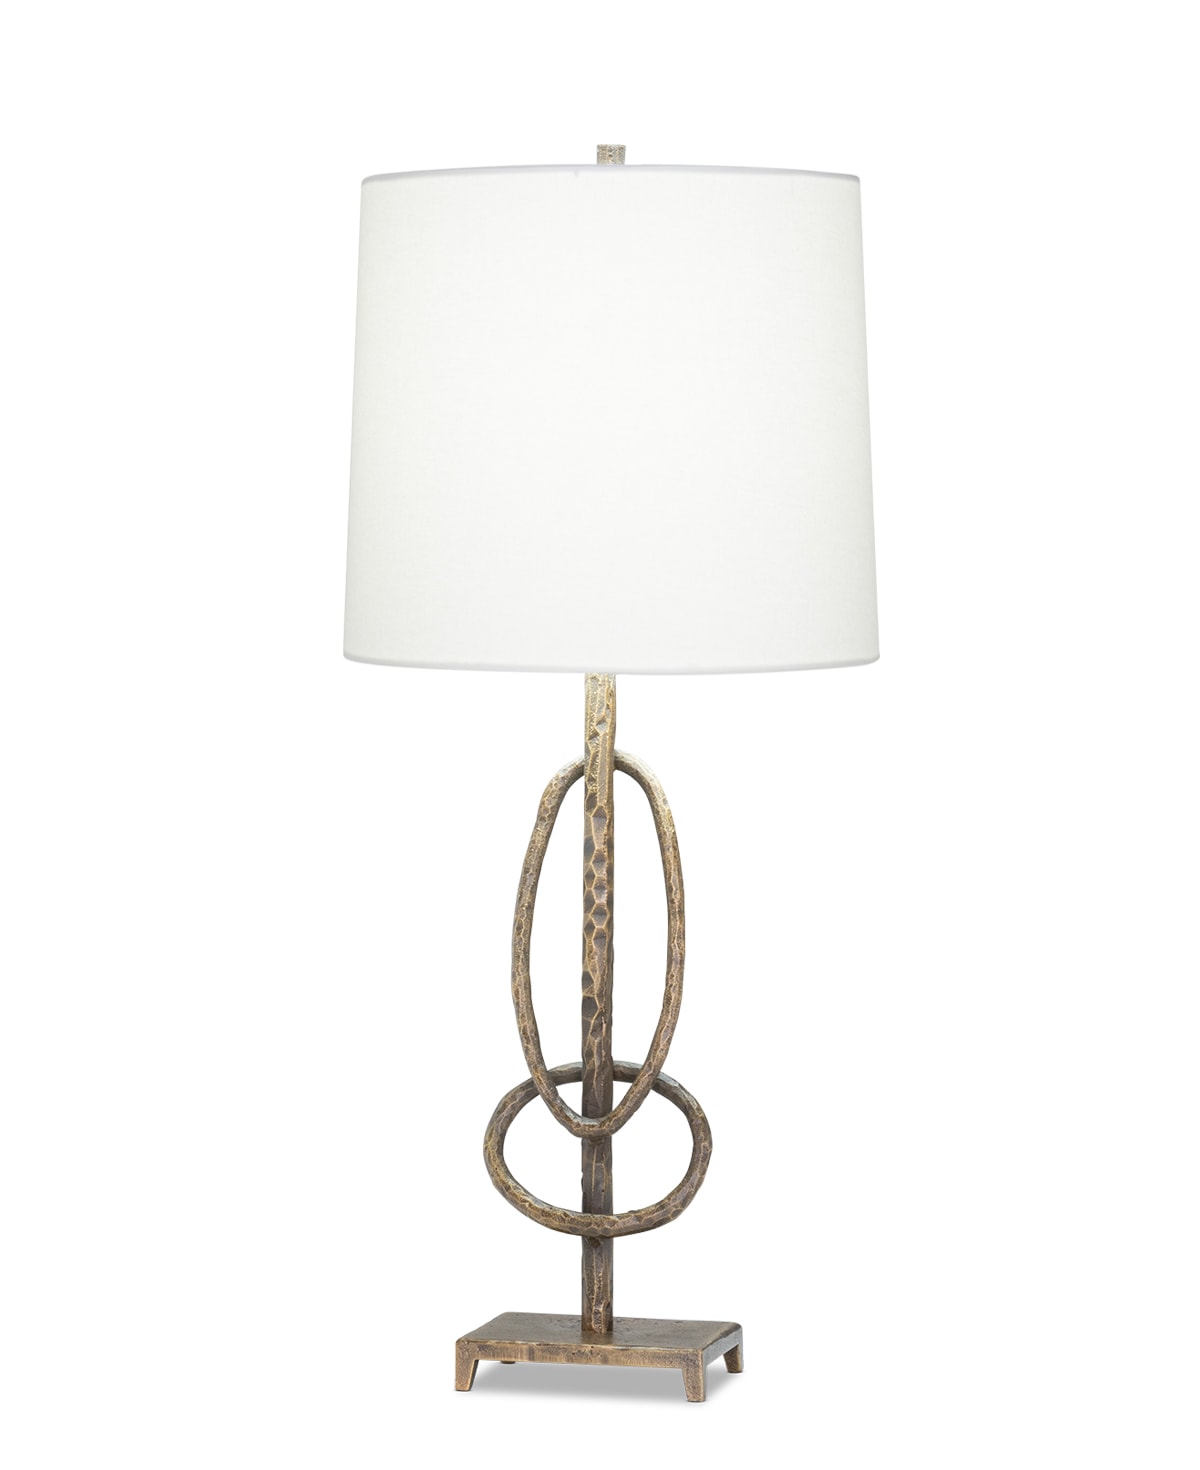 FlowDecor Nora Table Lamp in metal with antique brass finish and off-white linen tapered drum shade (# 4492)